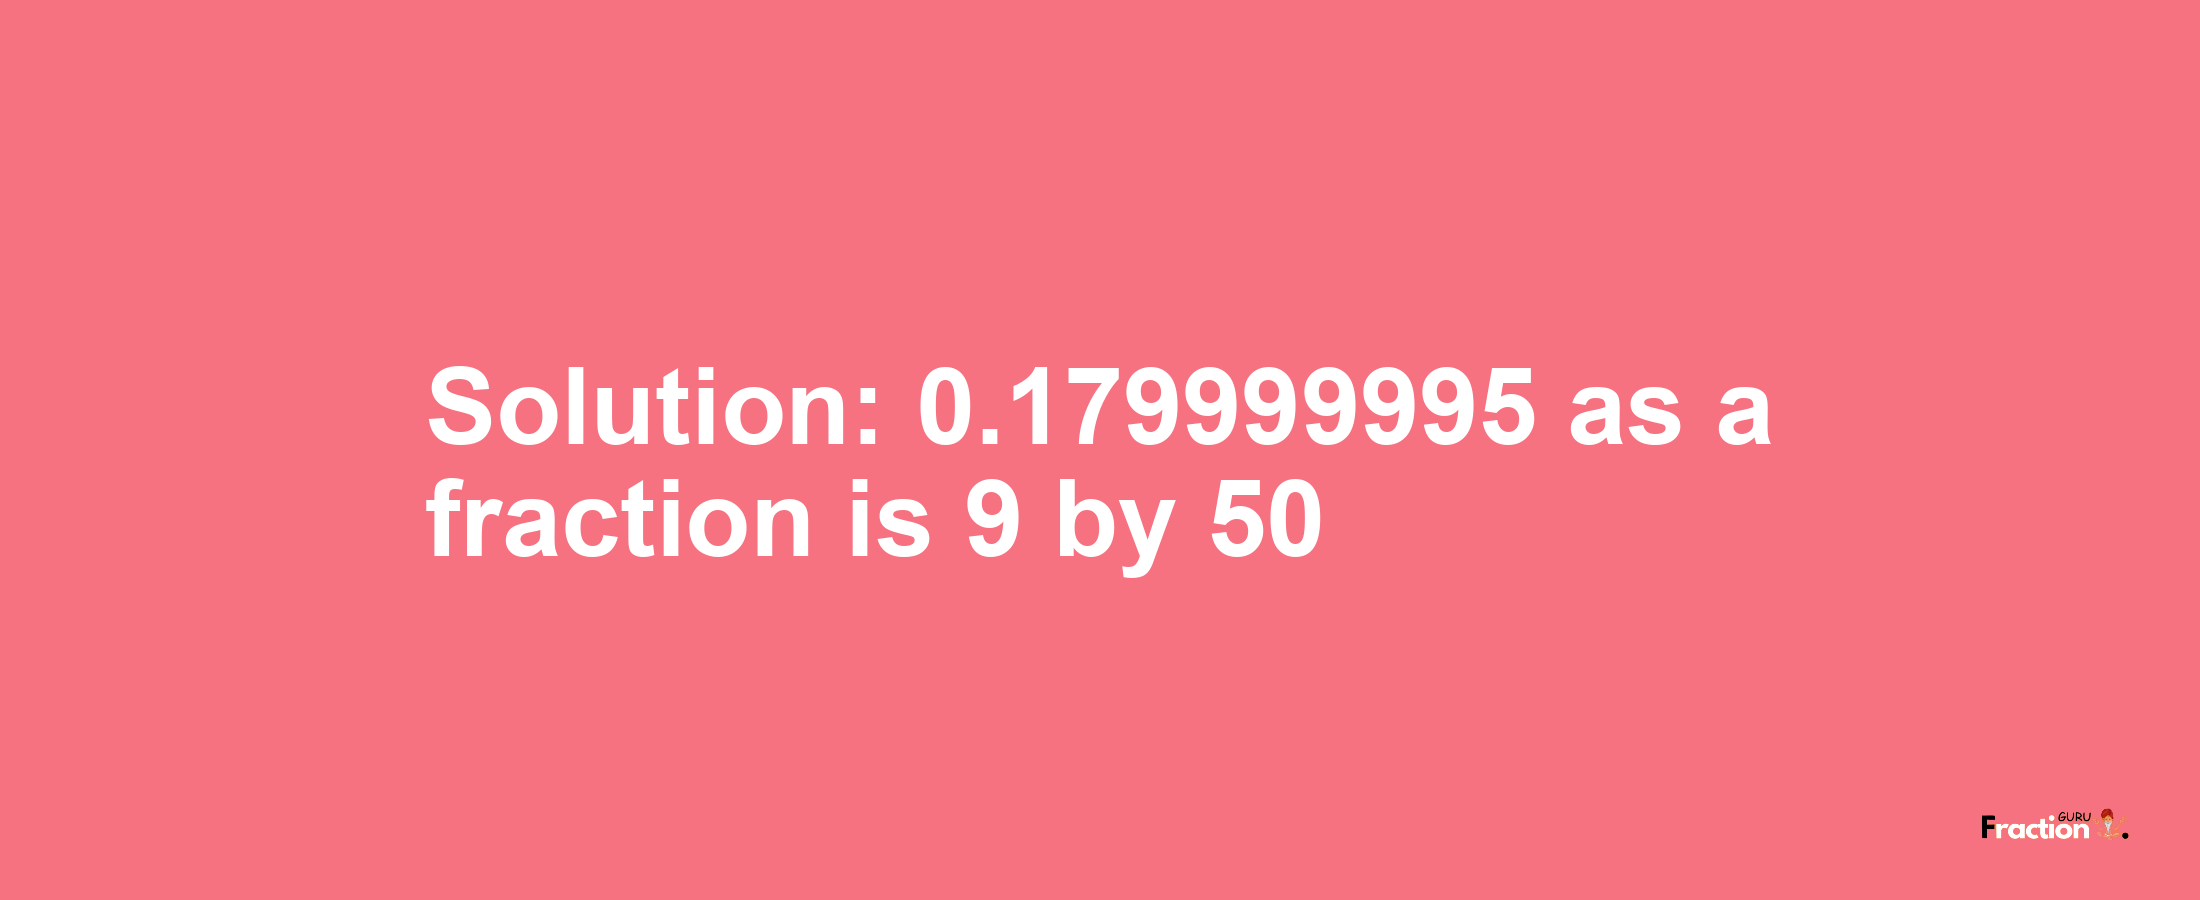 Solution:0.179999995 as a fraction is 9/50